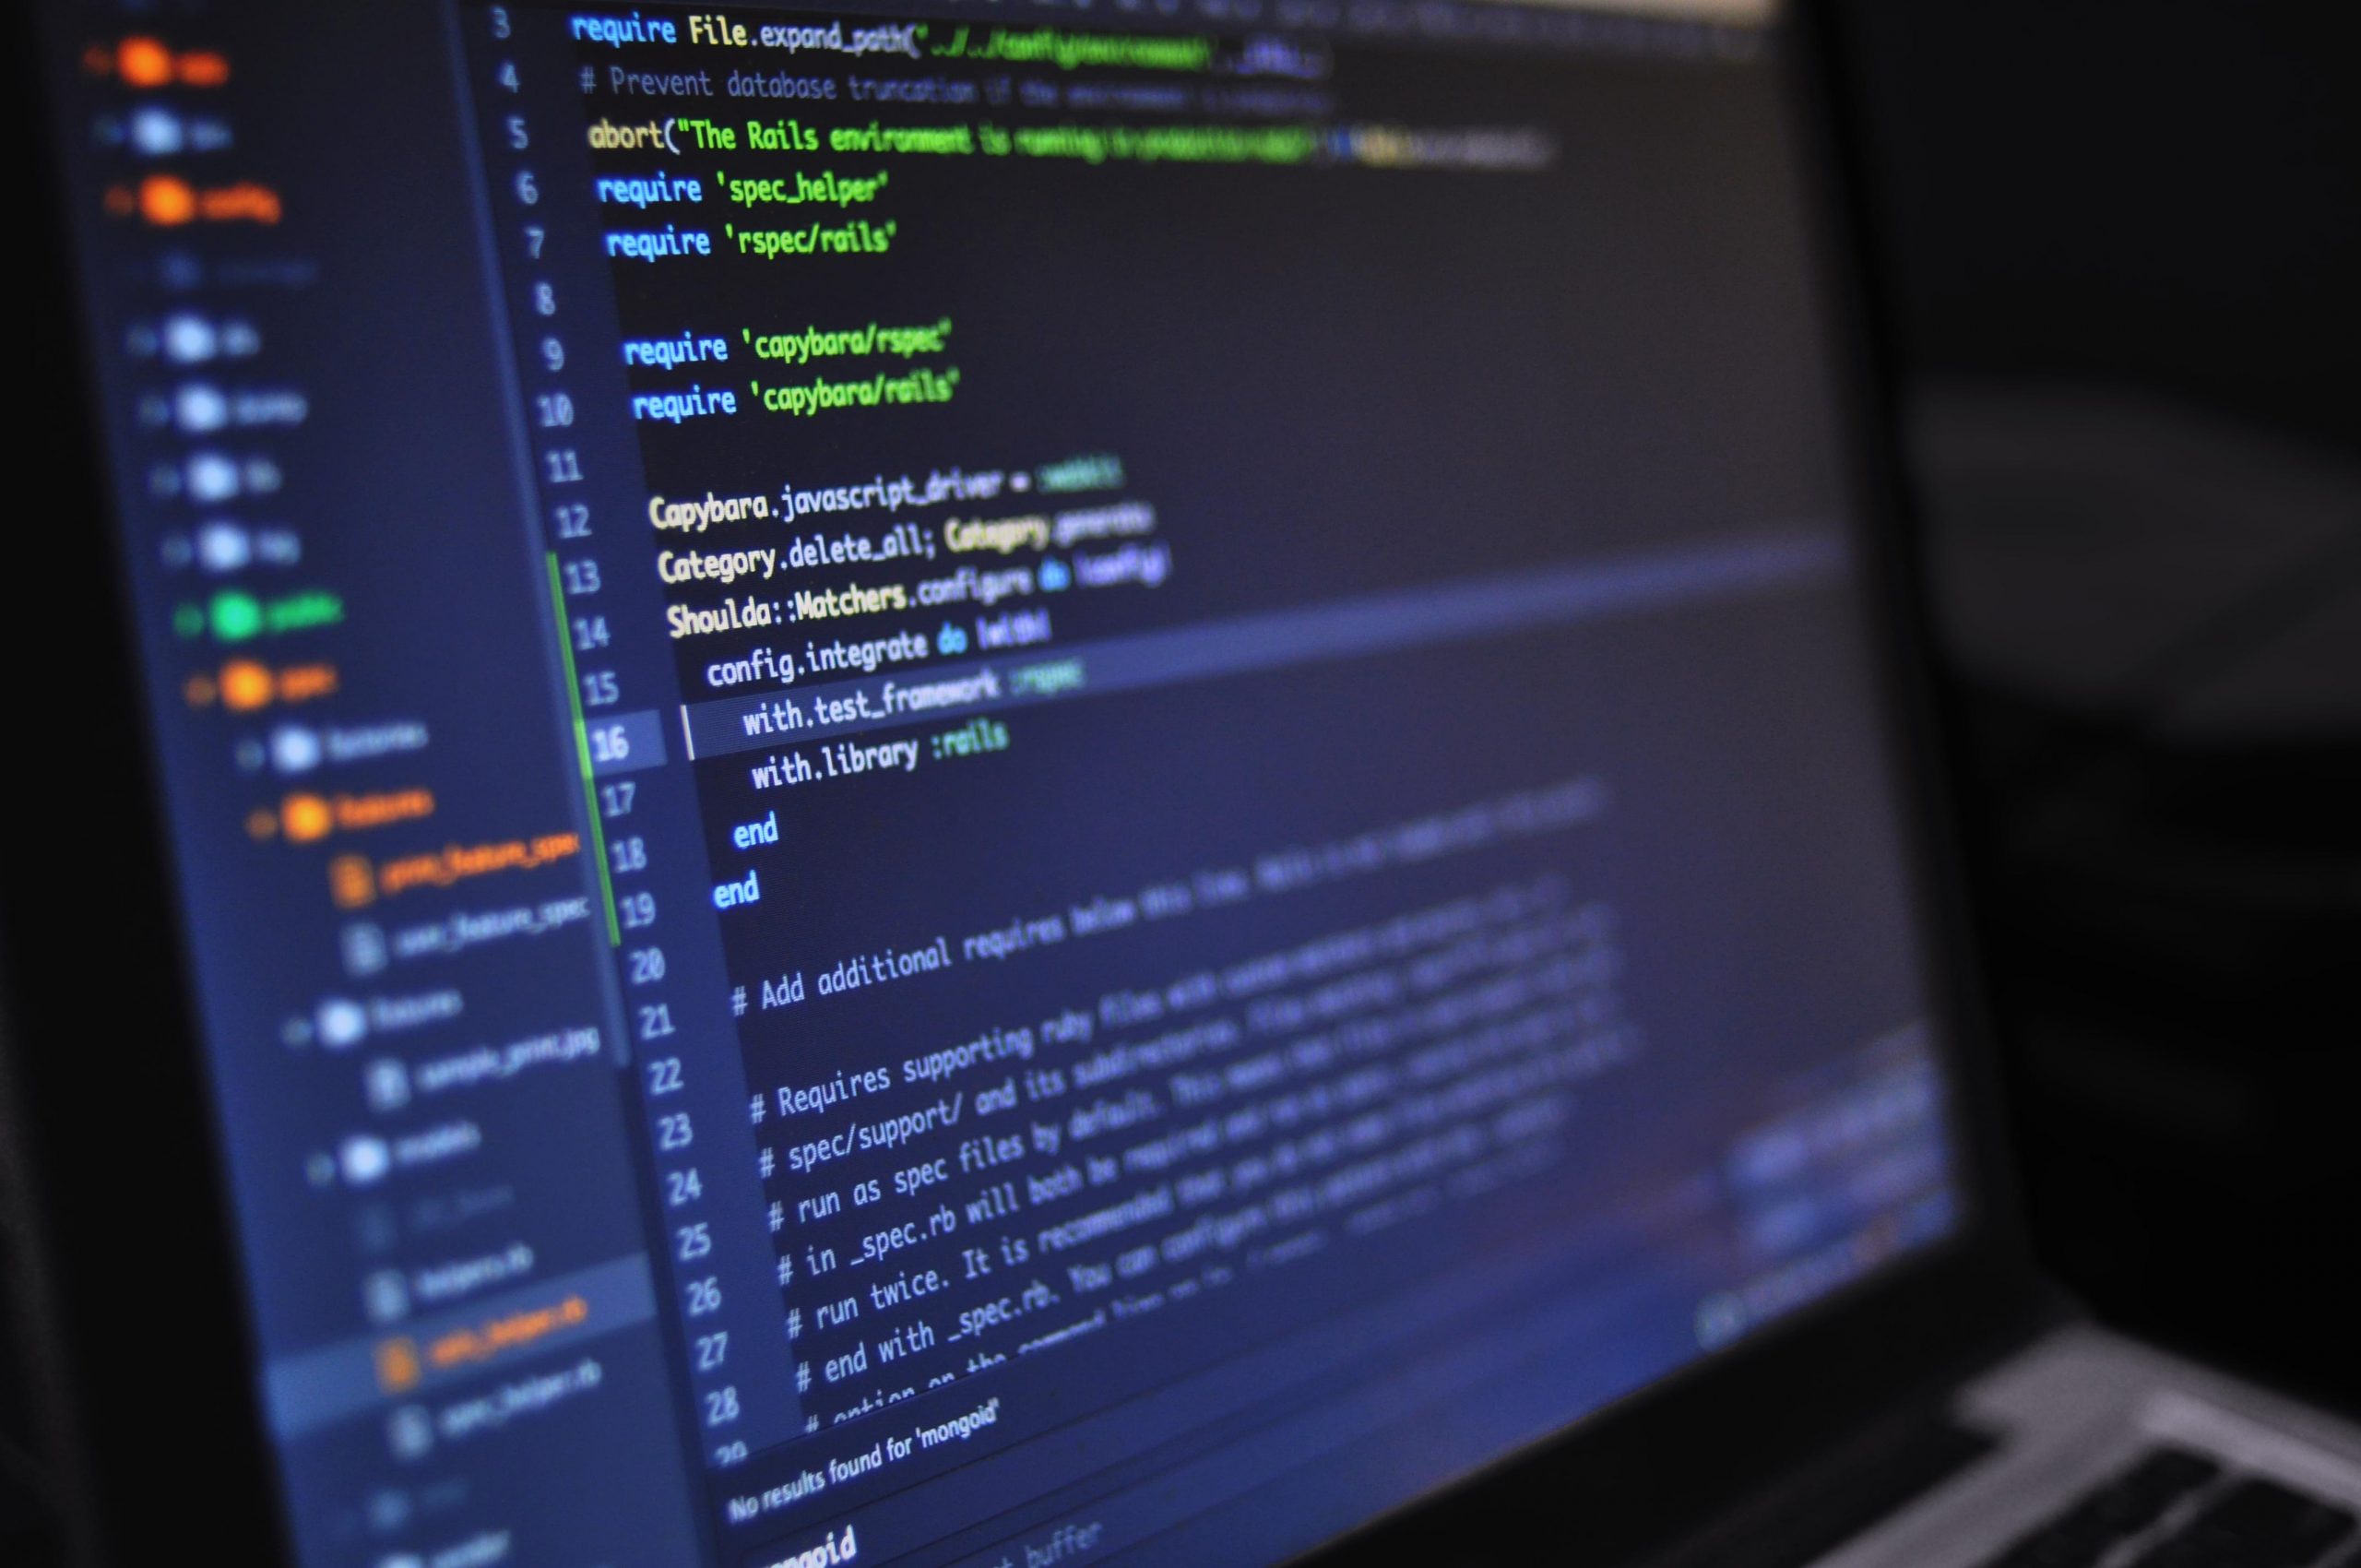 IDE vs. Code Editor: What's The Best For Writing Code?